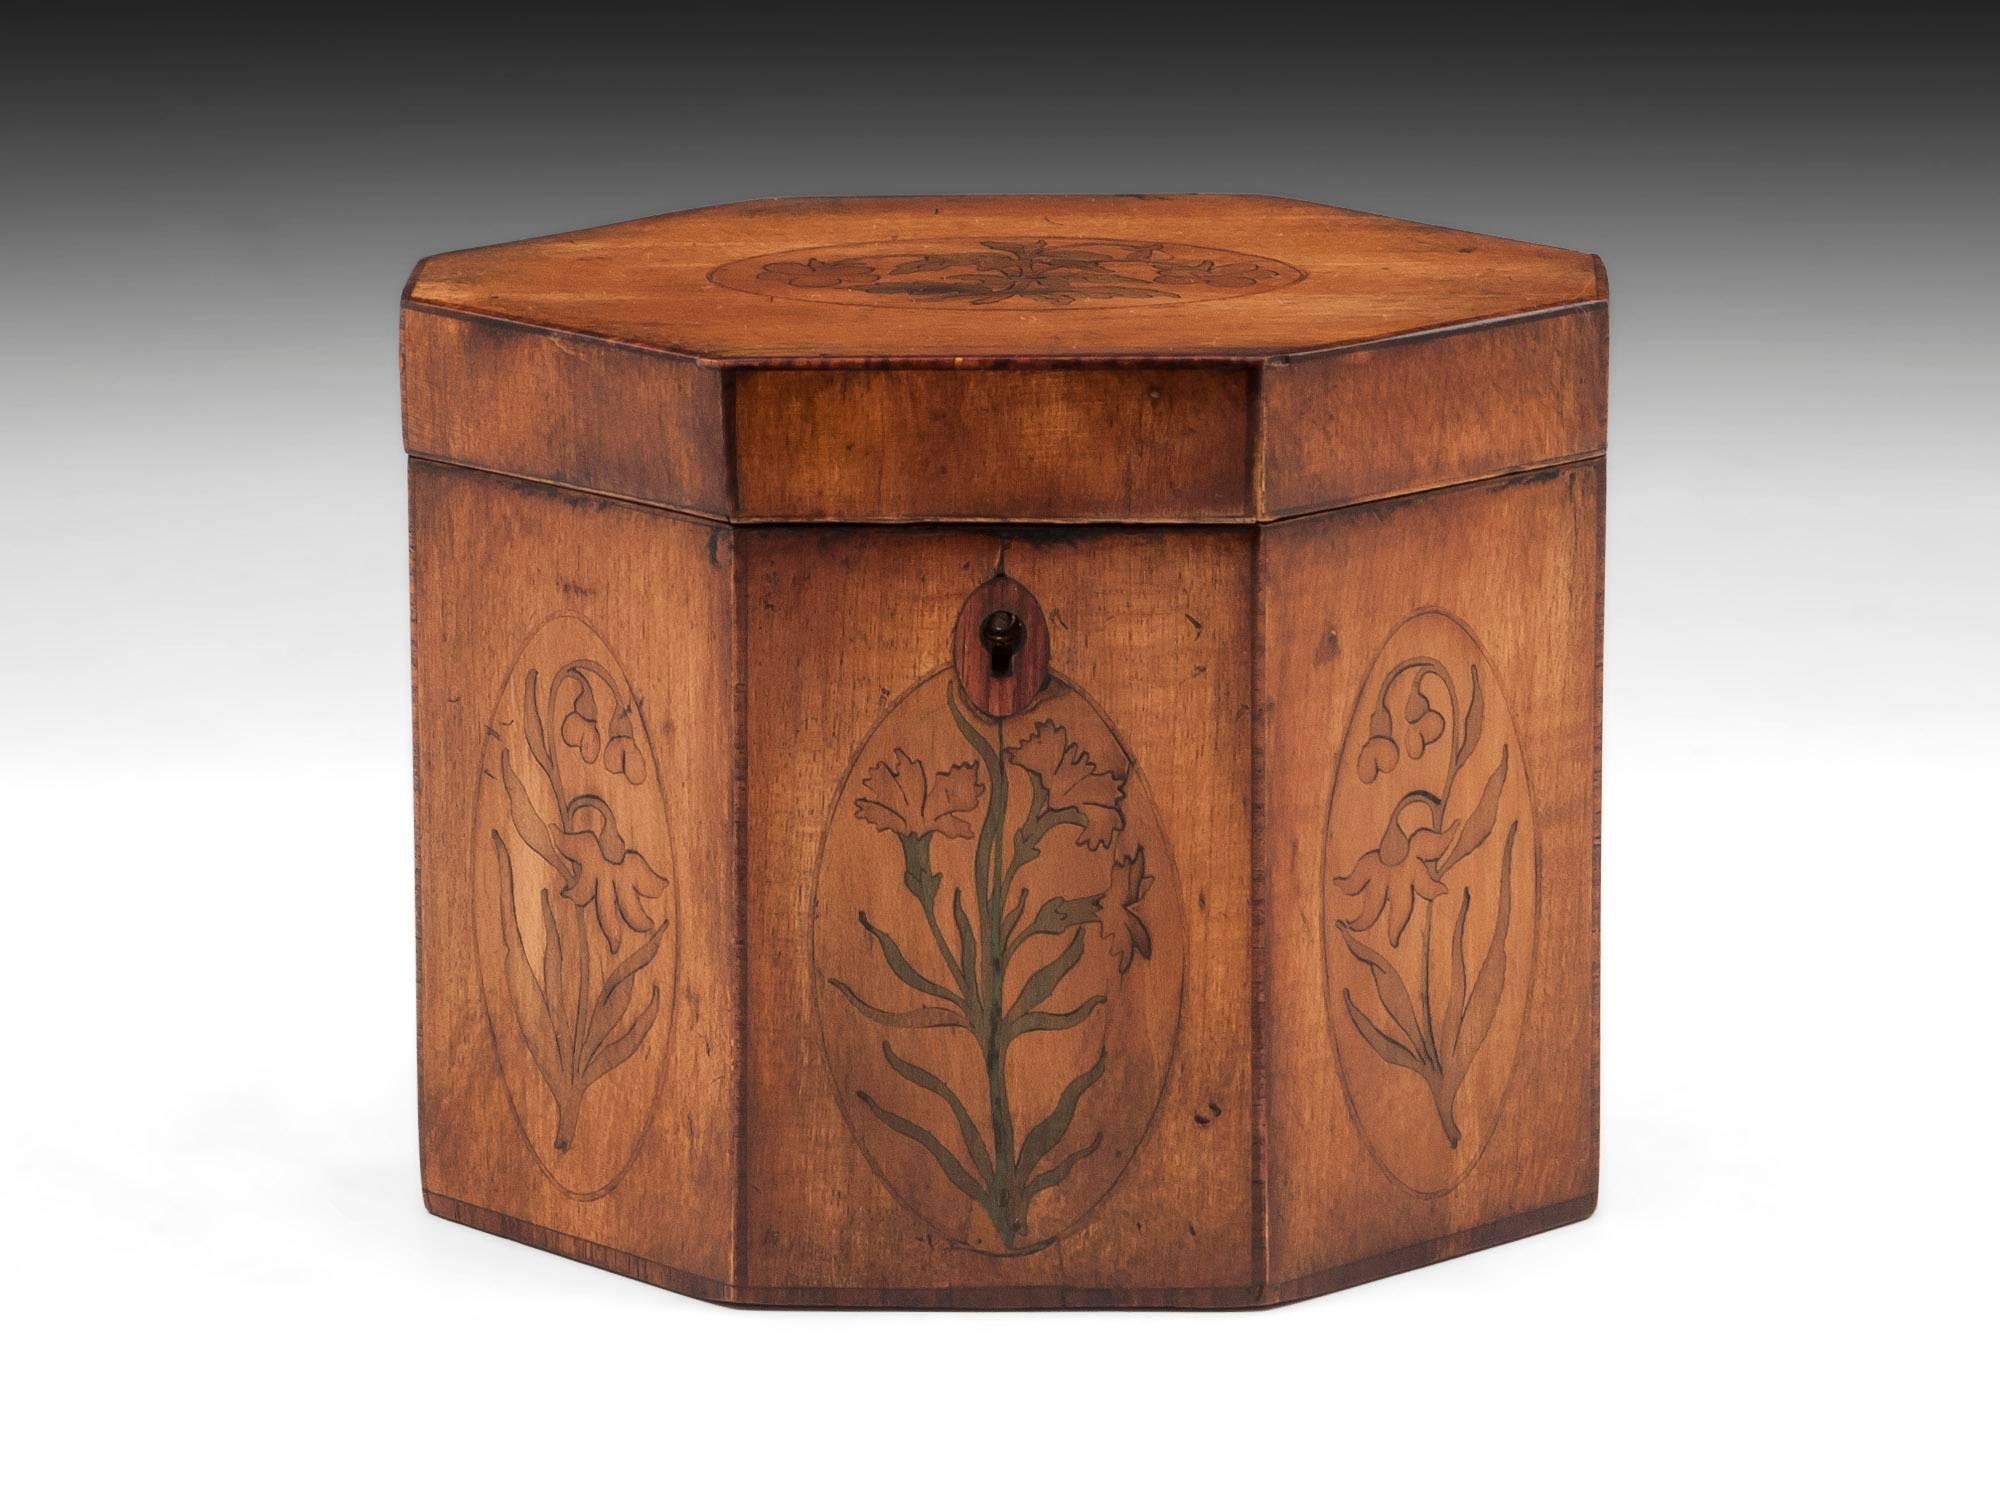 Antique harewood octagonal tea caddy with tulipwood edging and inlaid oval medallions containing tea plants. 

The interior of this charming Georgian harewood tea caddy features a mahogany floating lid with brass handle, still has traces of its